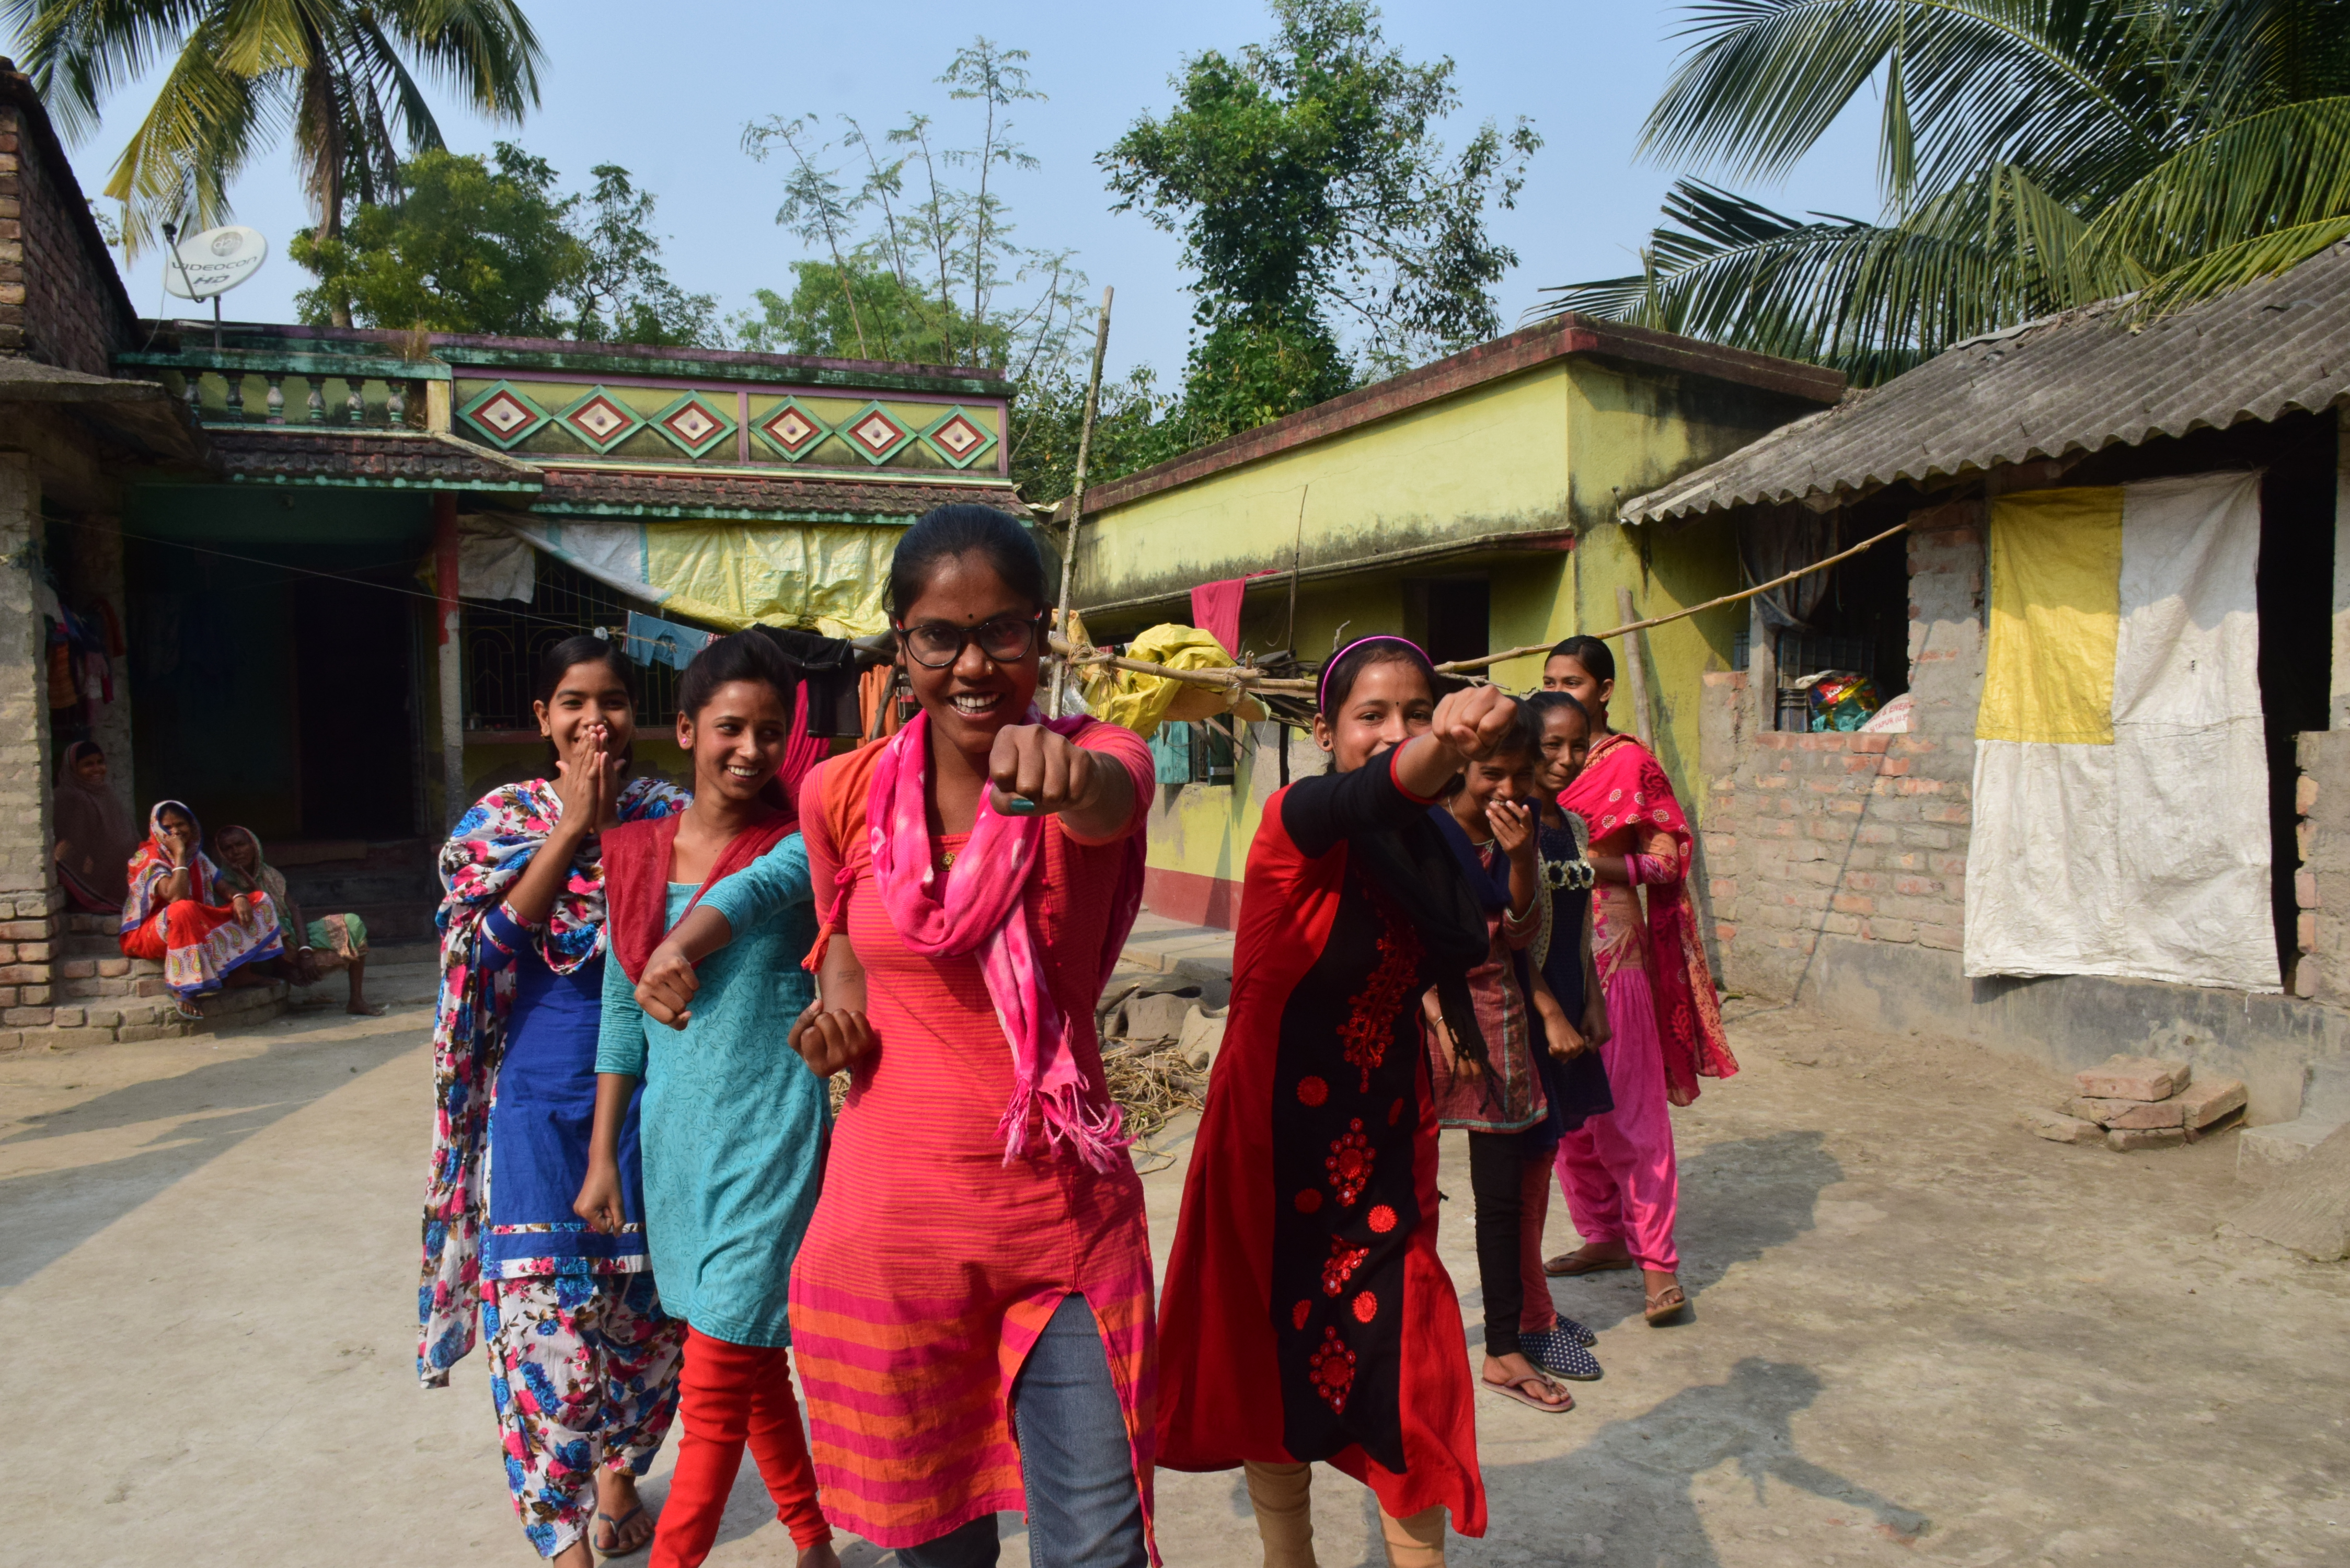 Hena Girl Power group in India played an instrumental role in protecting children in their community from early marriage, trafficking, child labour, and dropping out of school in the past.